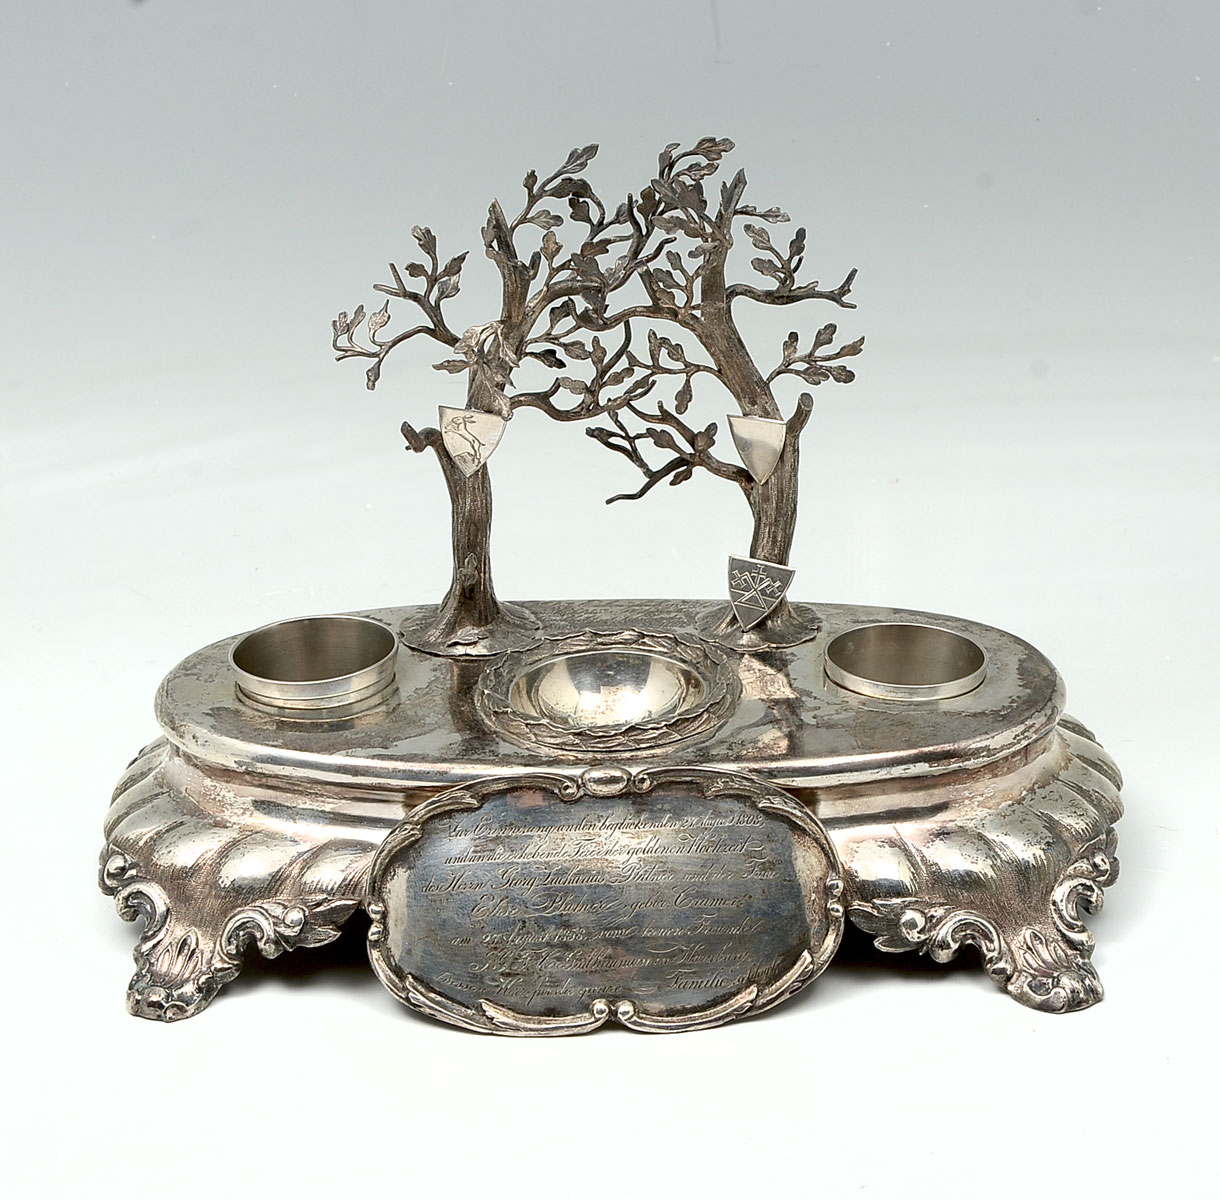  800 GERMAN SILVER INKWELL Approx  36e629